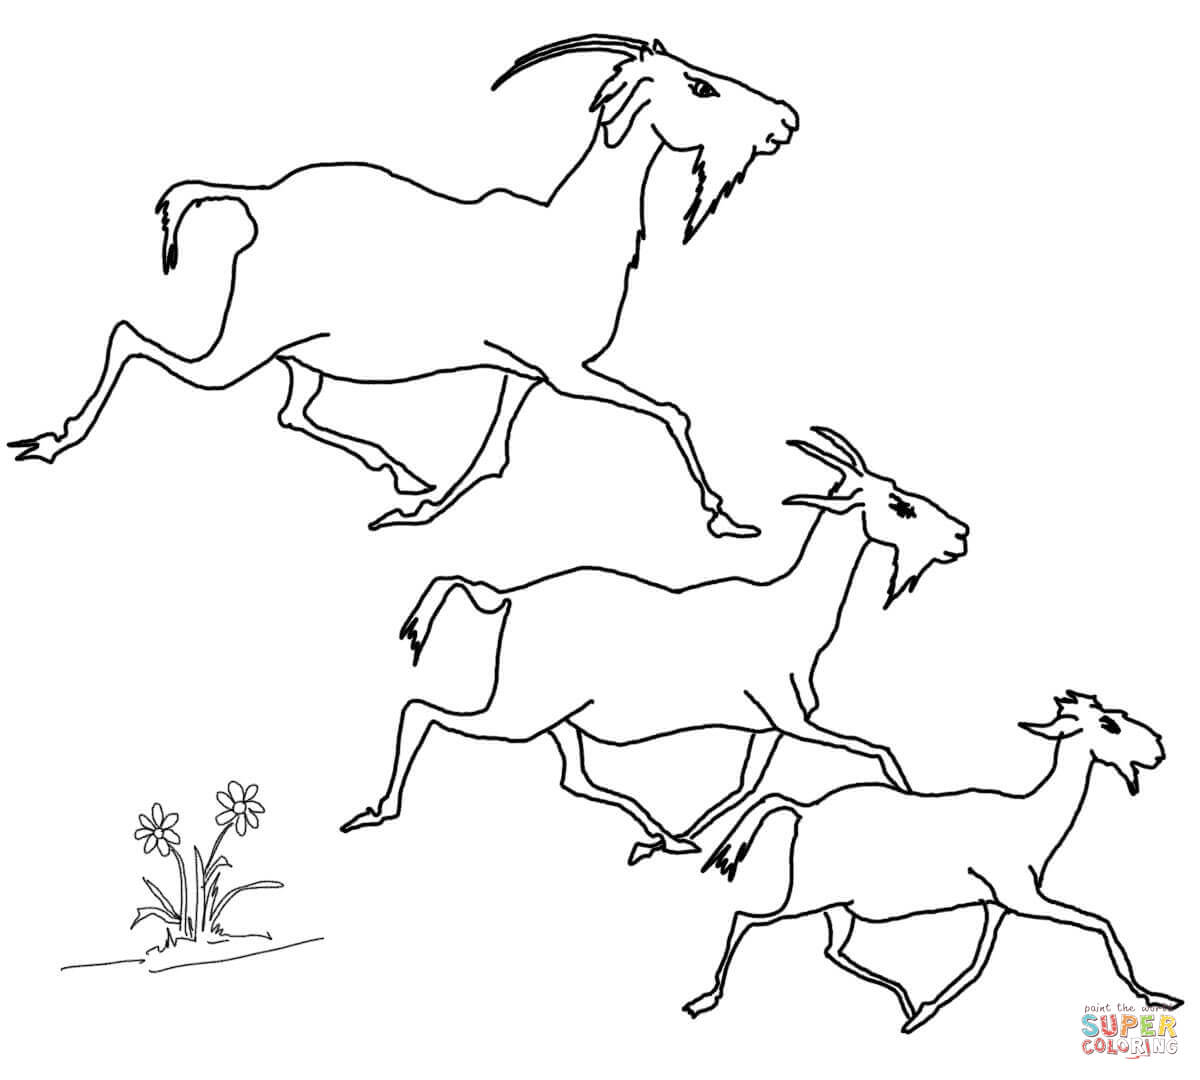 Cartoon goat coloring pages | Free Coloring Pages